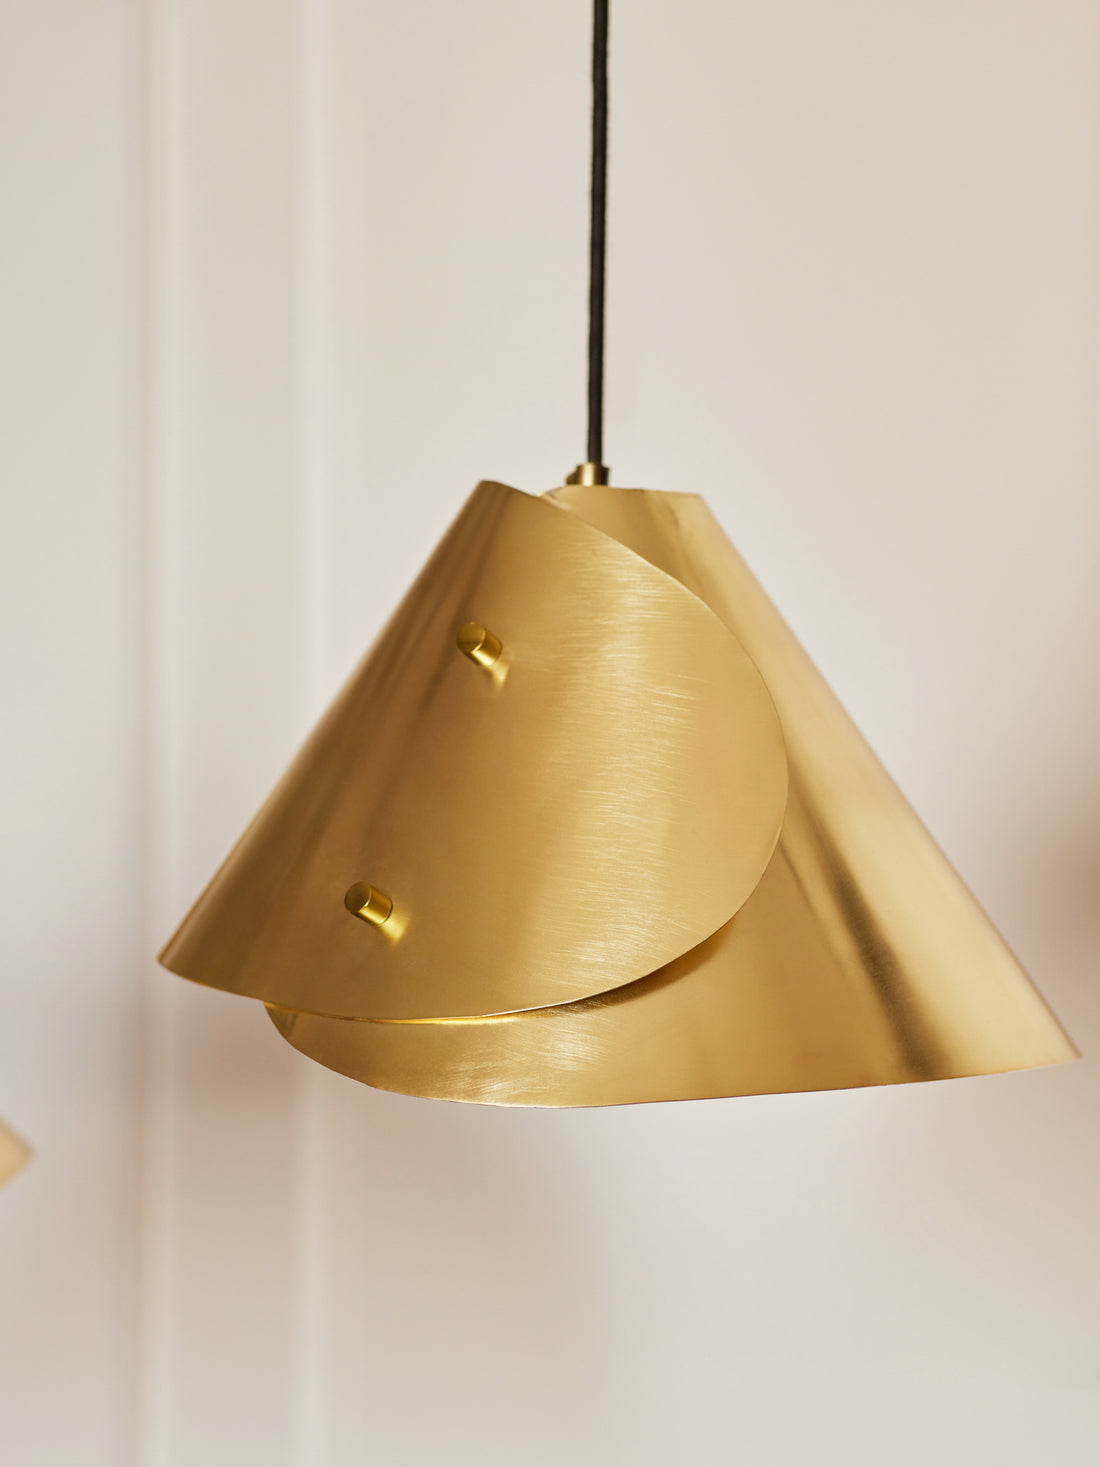 Add a metallic touch to your home with a gold lamp. Shop hanging lamps for living room by Fleck